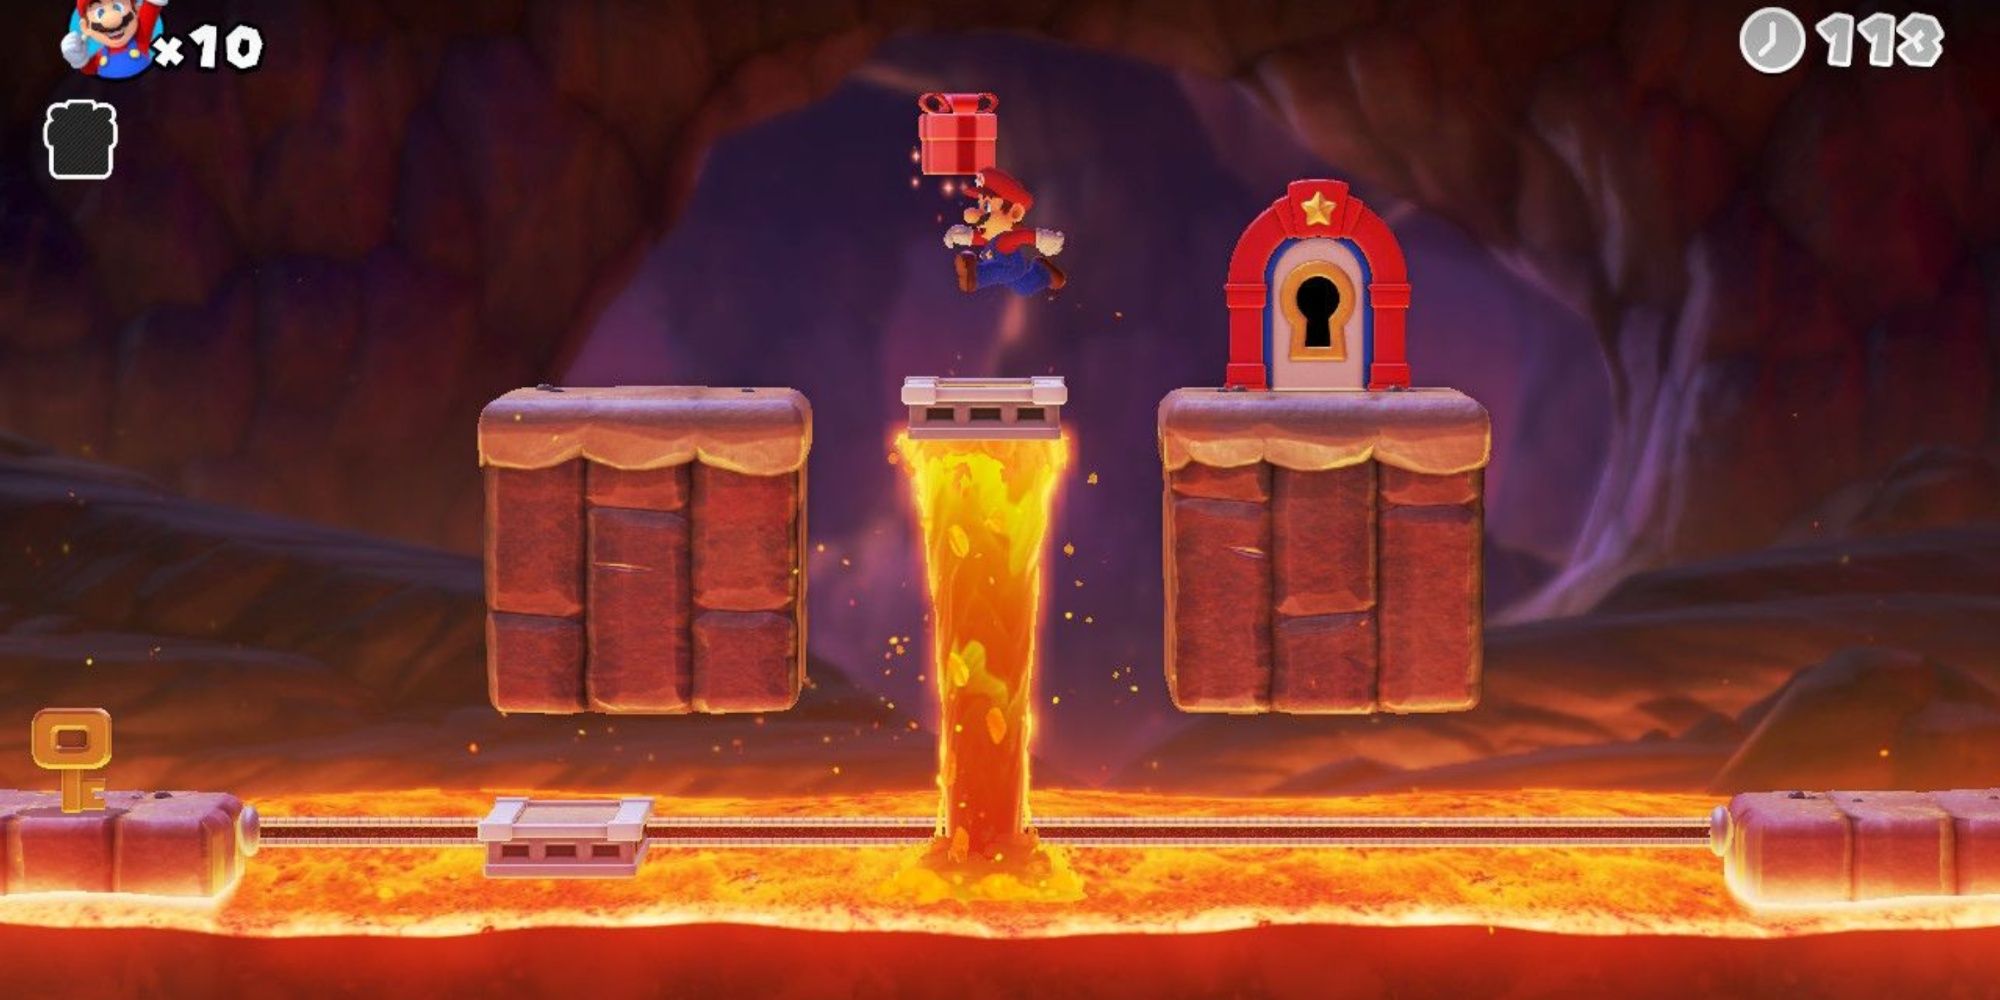 Mario jumping to reach red gift over lava